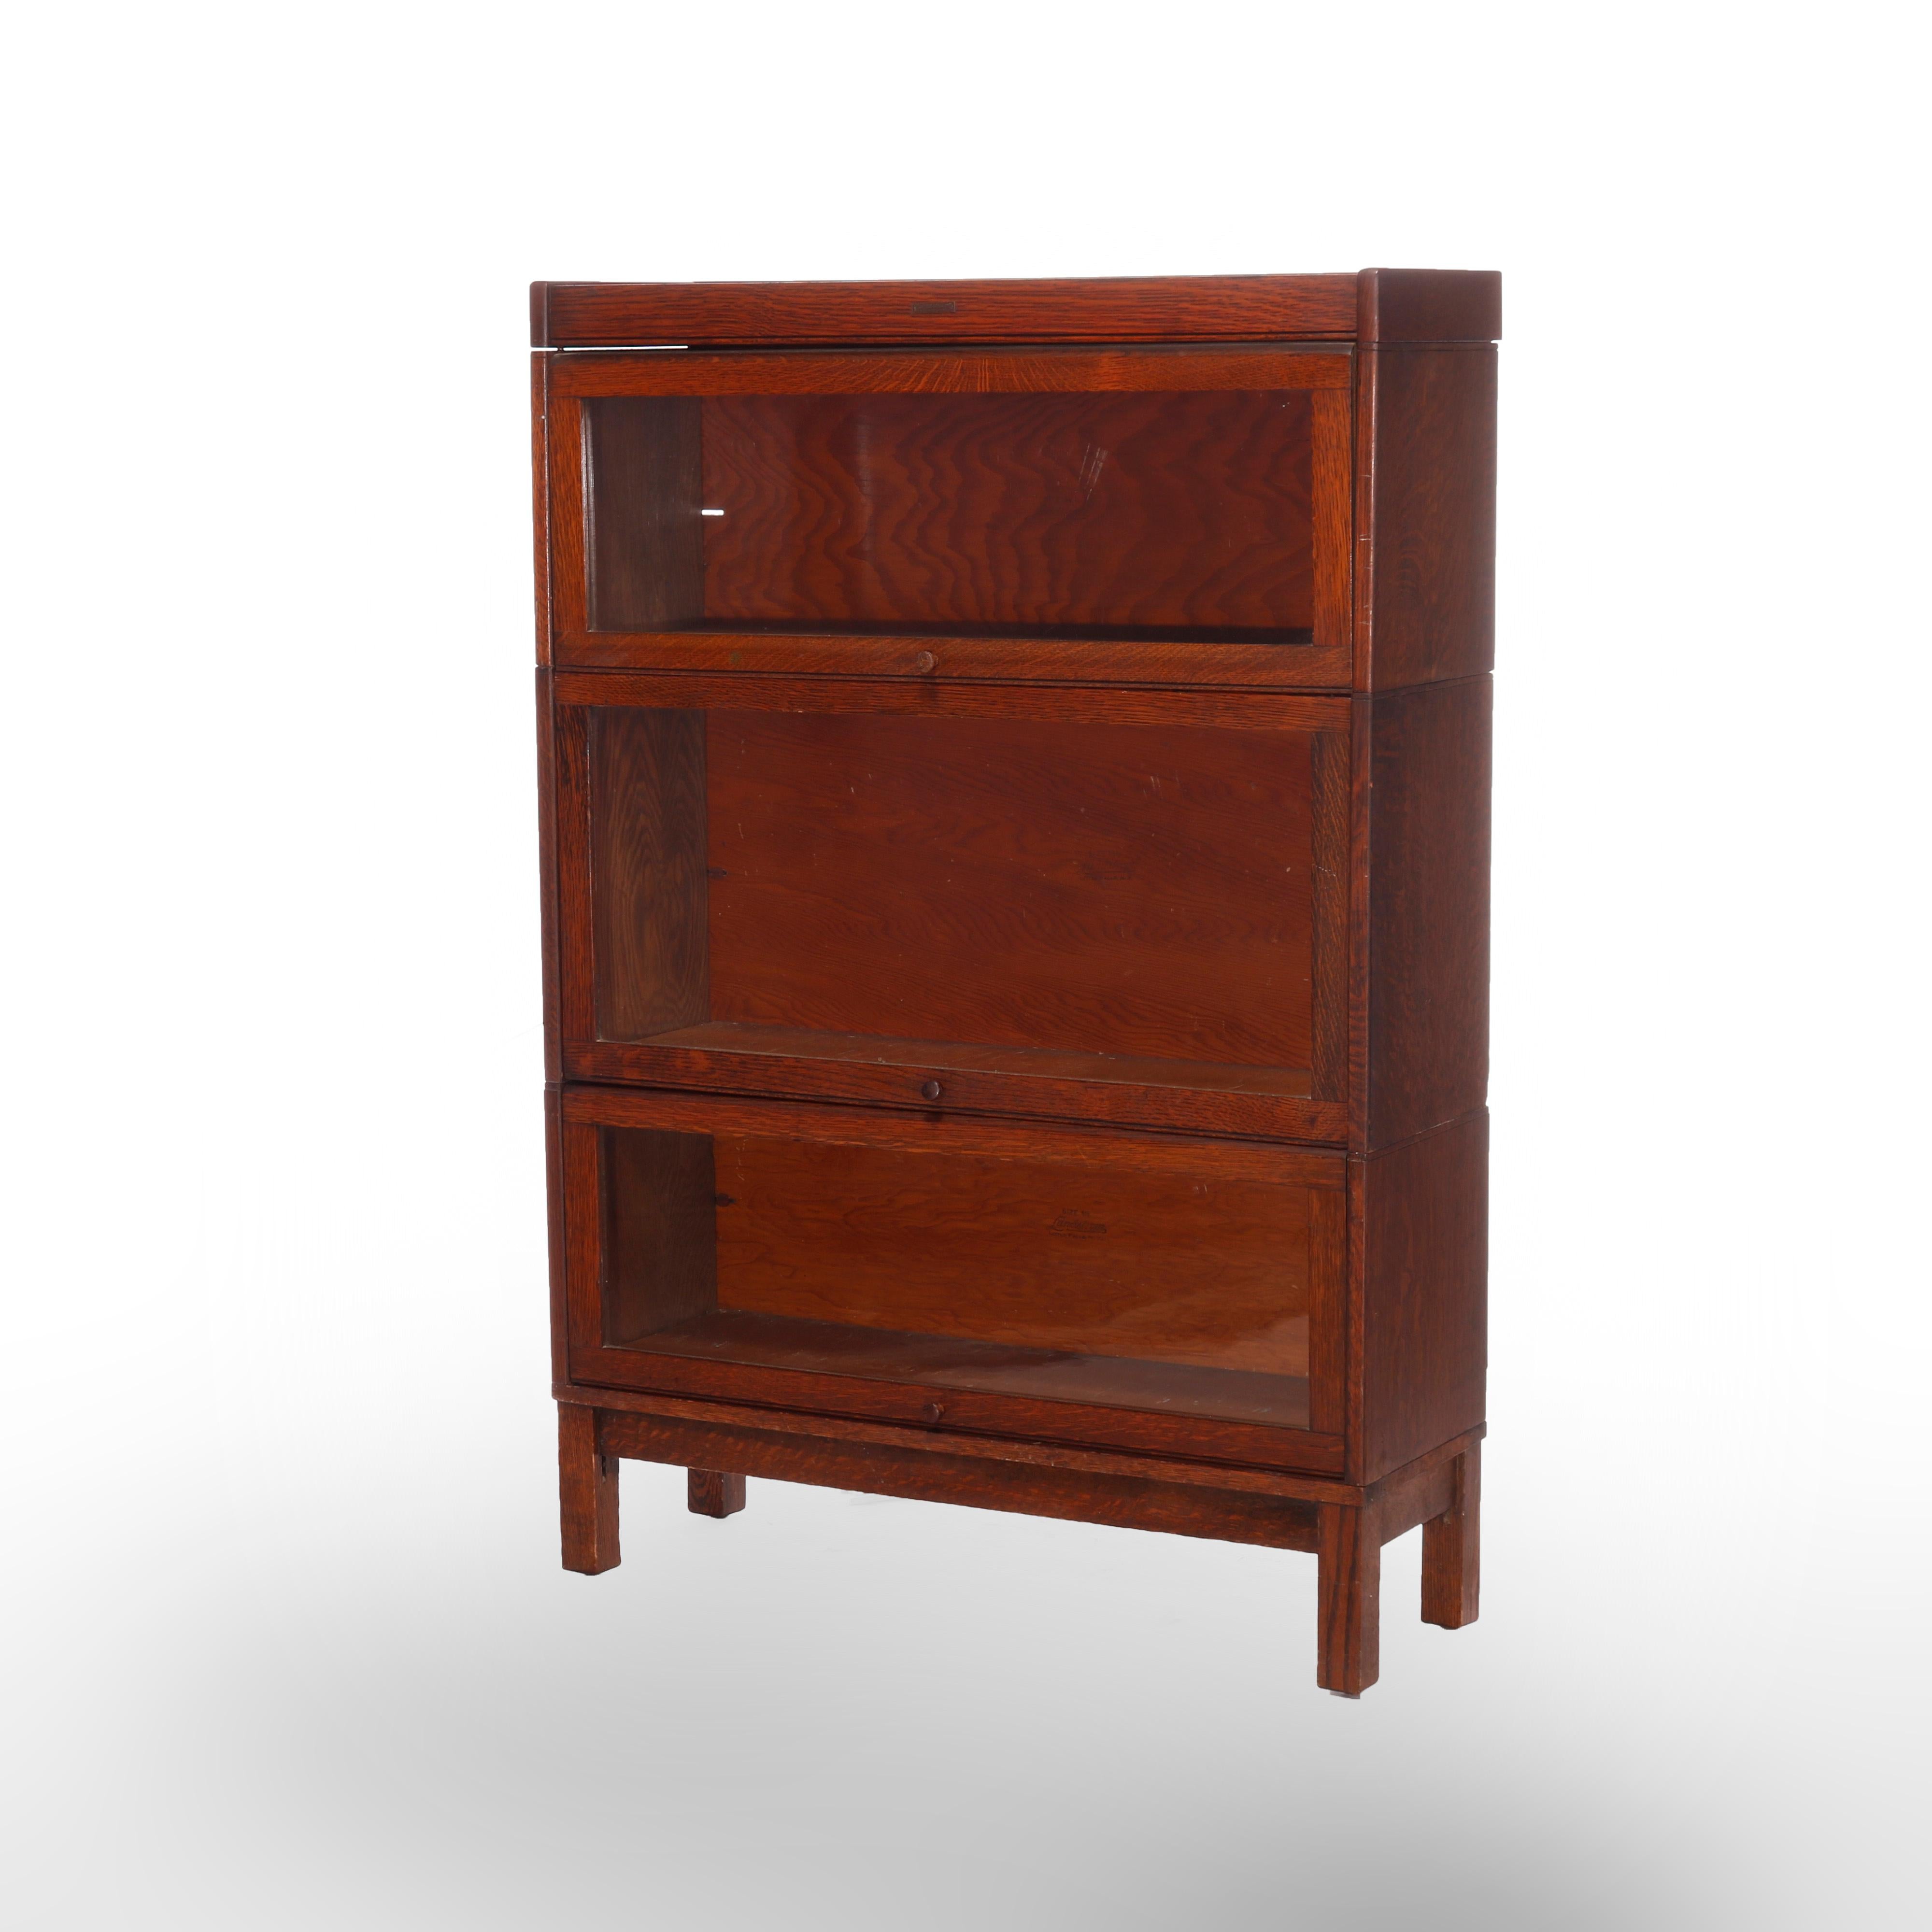 An antique Arts & Crafts Barrister bookcase by Lundstrom offers quarter sawn oak construction with three stacks, each having pull out glass doors and raised on straight and square legs, maker label as photographed, c1910

Measures - 49''H X 33.75''W